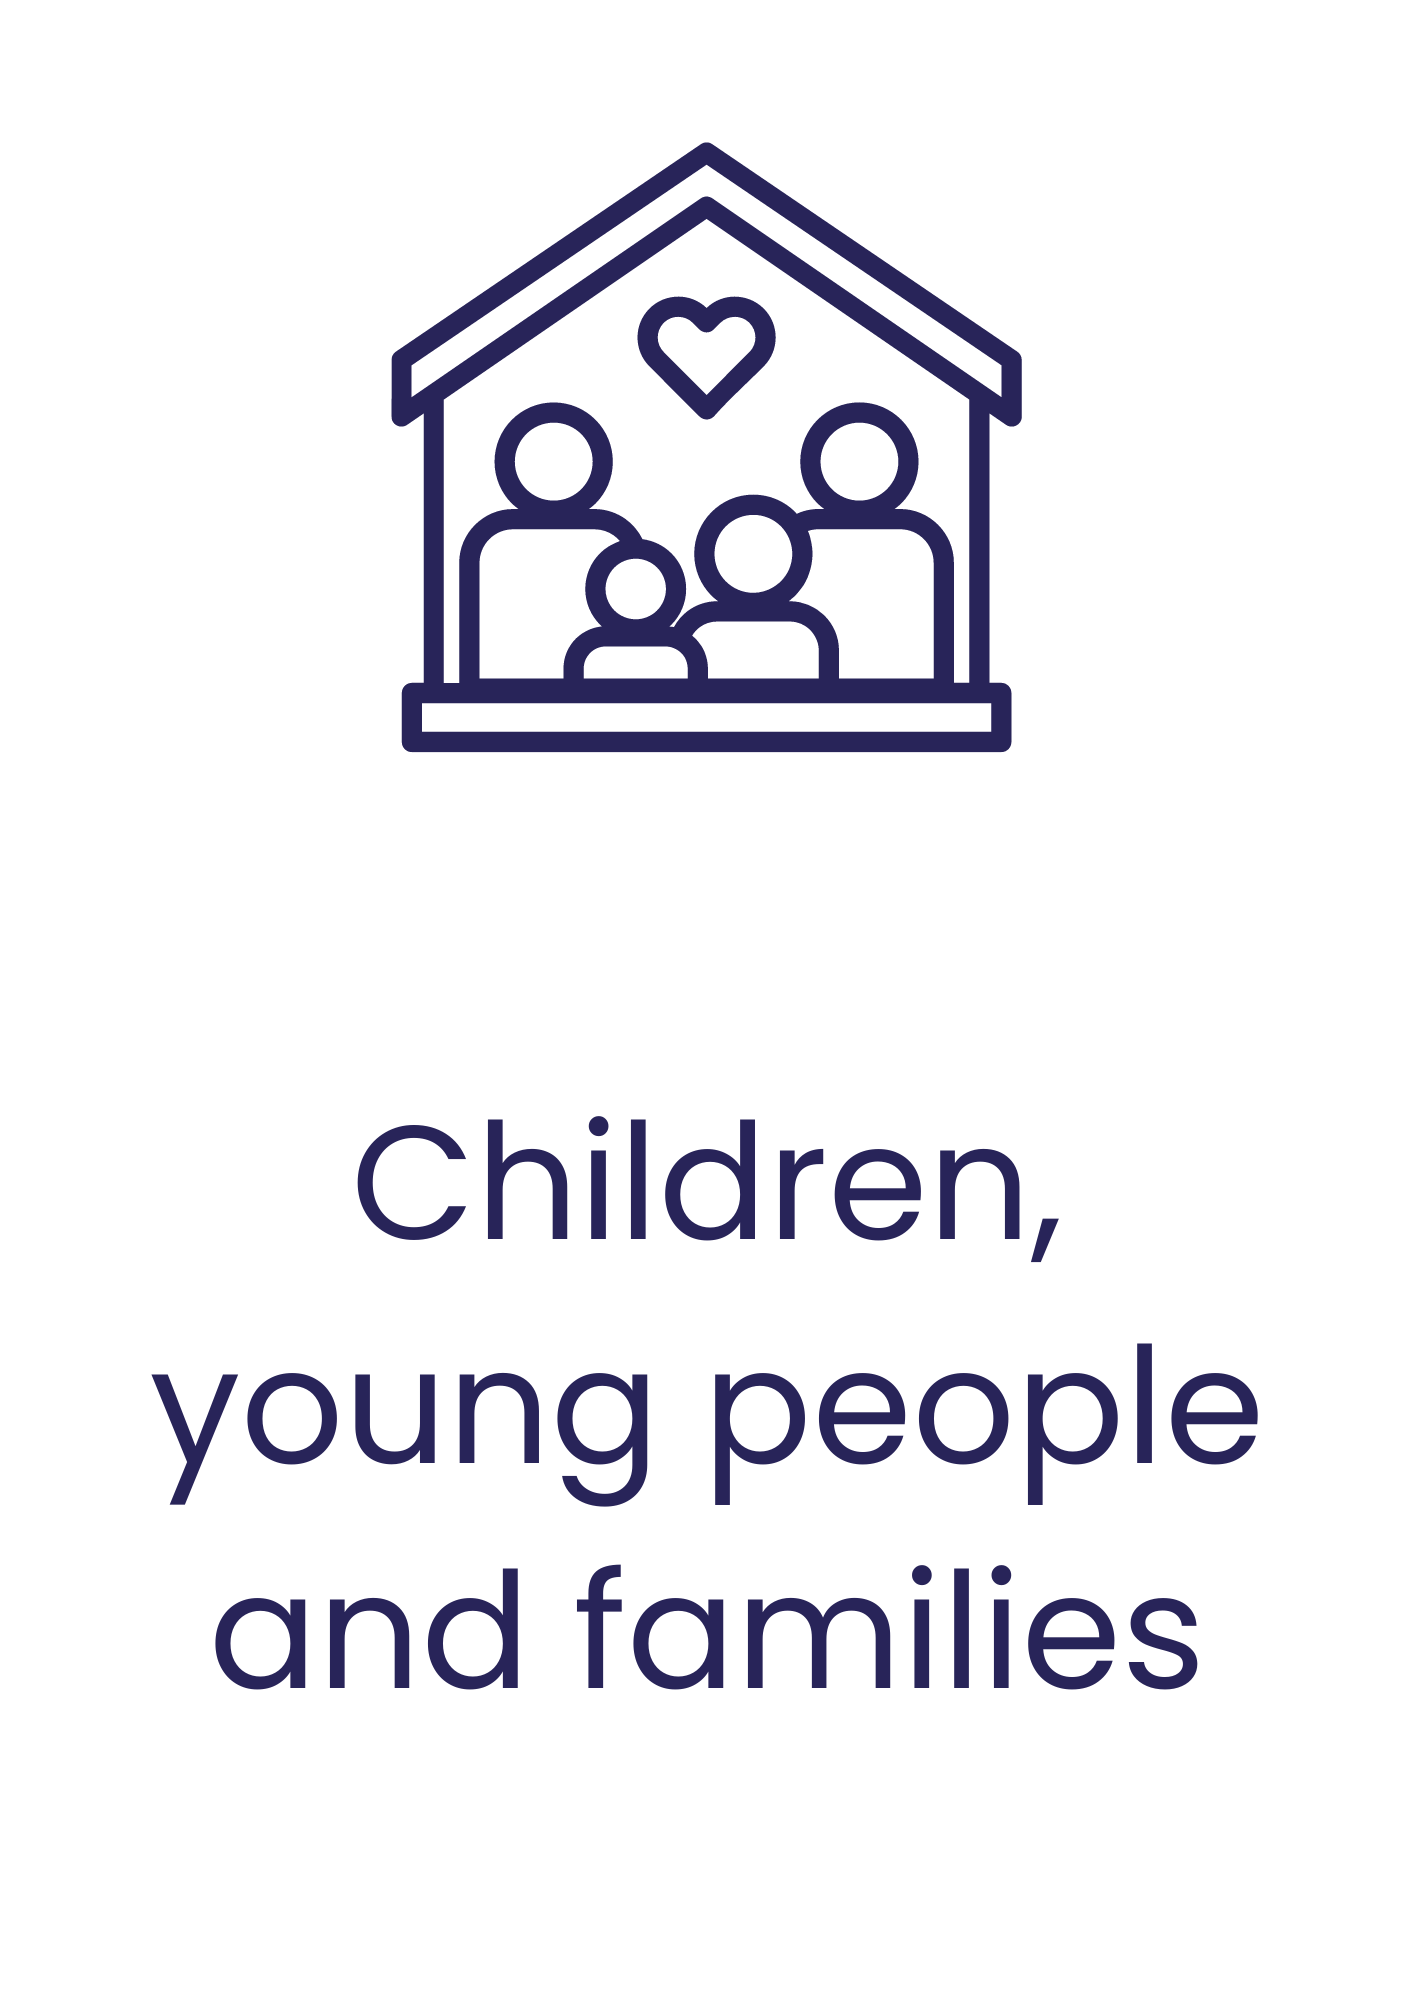 Children, young people and families funding